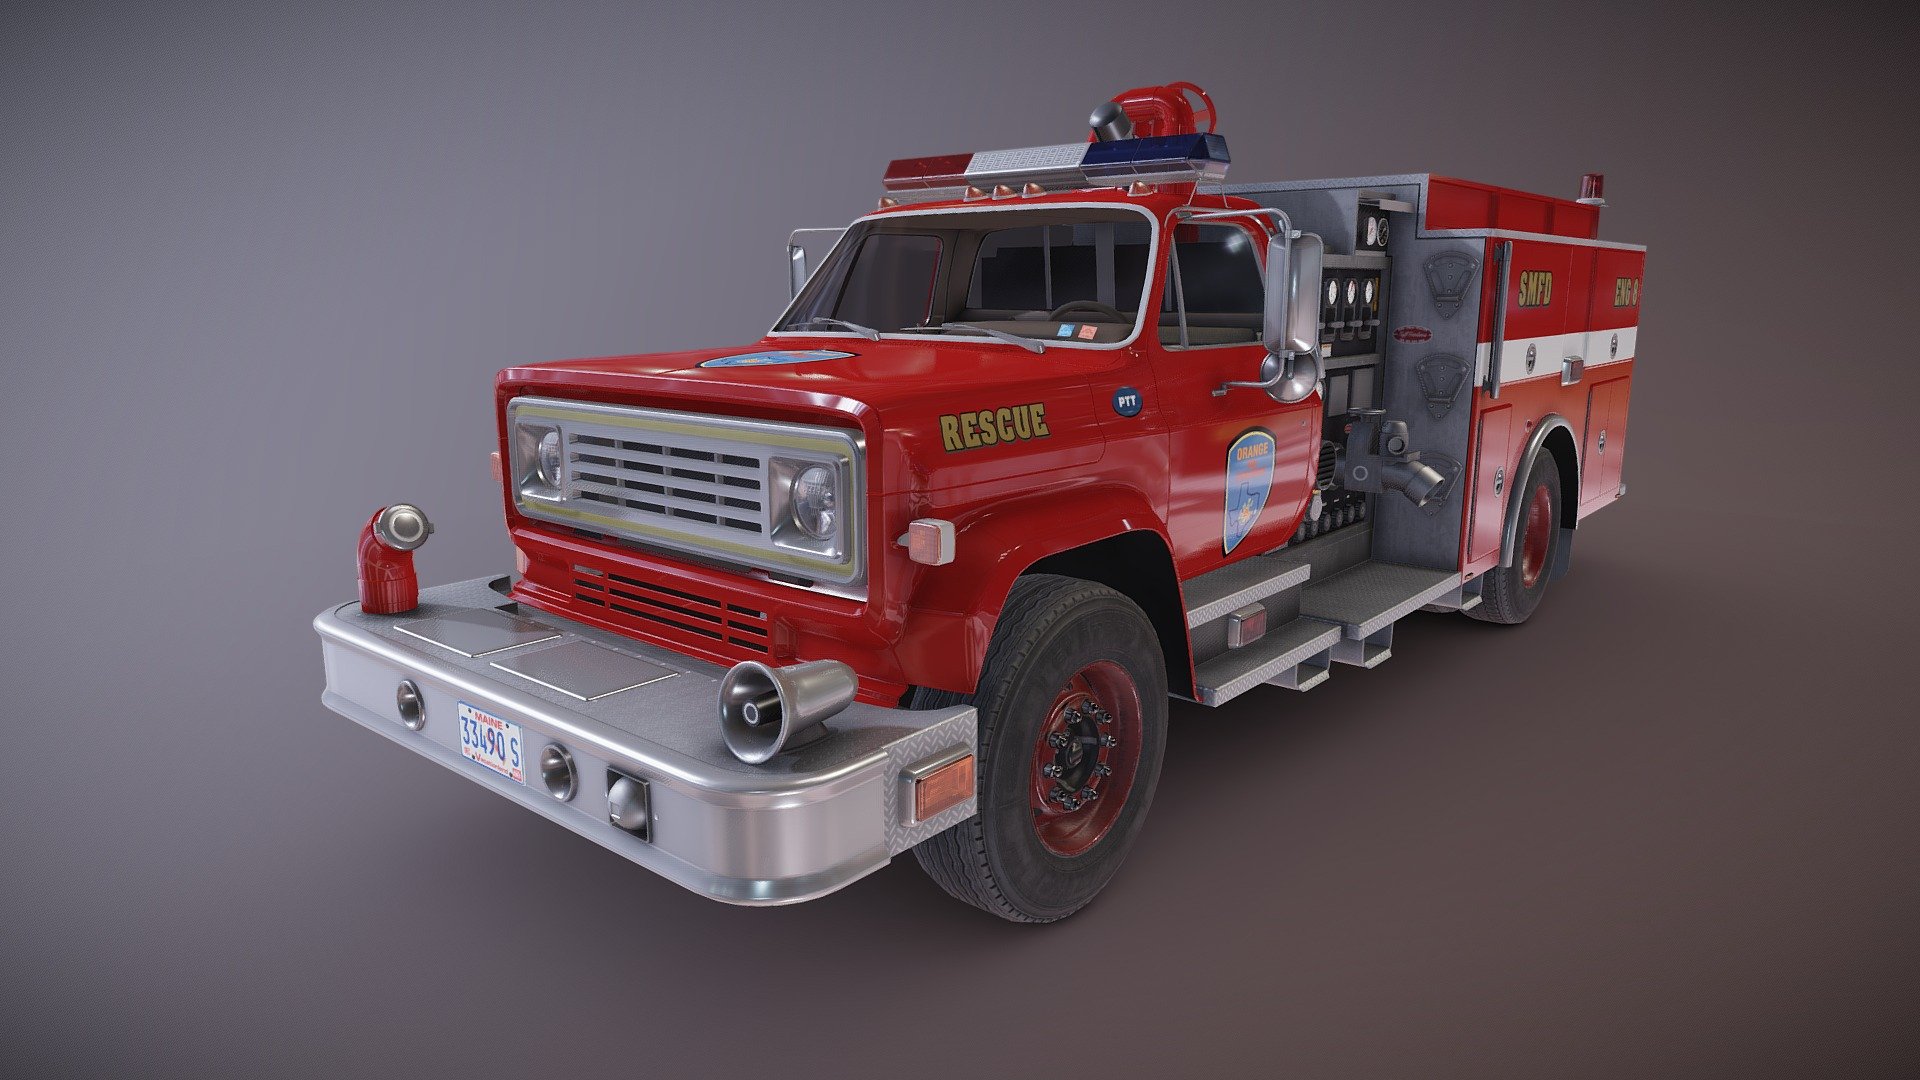 Vintage pump fire truck game ready model.

Full textured model with clean topology.

High accuracy exterior model.

Different tires for rear and front wheels.

High detailed cabin - seams, rivets, chrome parts, wipers and etc.

High detailed equipment - gauges, valves, tubes etc.

Lowpoly interior - 2855 tris 1652 verts.

Wheels - 13350 tris 7762 verts.

Full model - 83049 tris 50288 verts.

High detailed rims and tires, with PBR maps(Base_Color/Metallic/Normal/Roughness.png2048x2048 )

Original scale.

Lenght 6.6m , width 2.1m , height 2.4m.

Model ready for real-time apps, games, virtual reality and augmented reality.

Asset looks accuracy and realistic and become a good part of your project 3d model